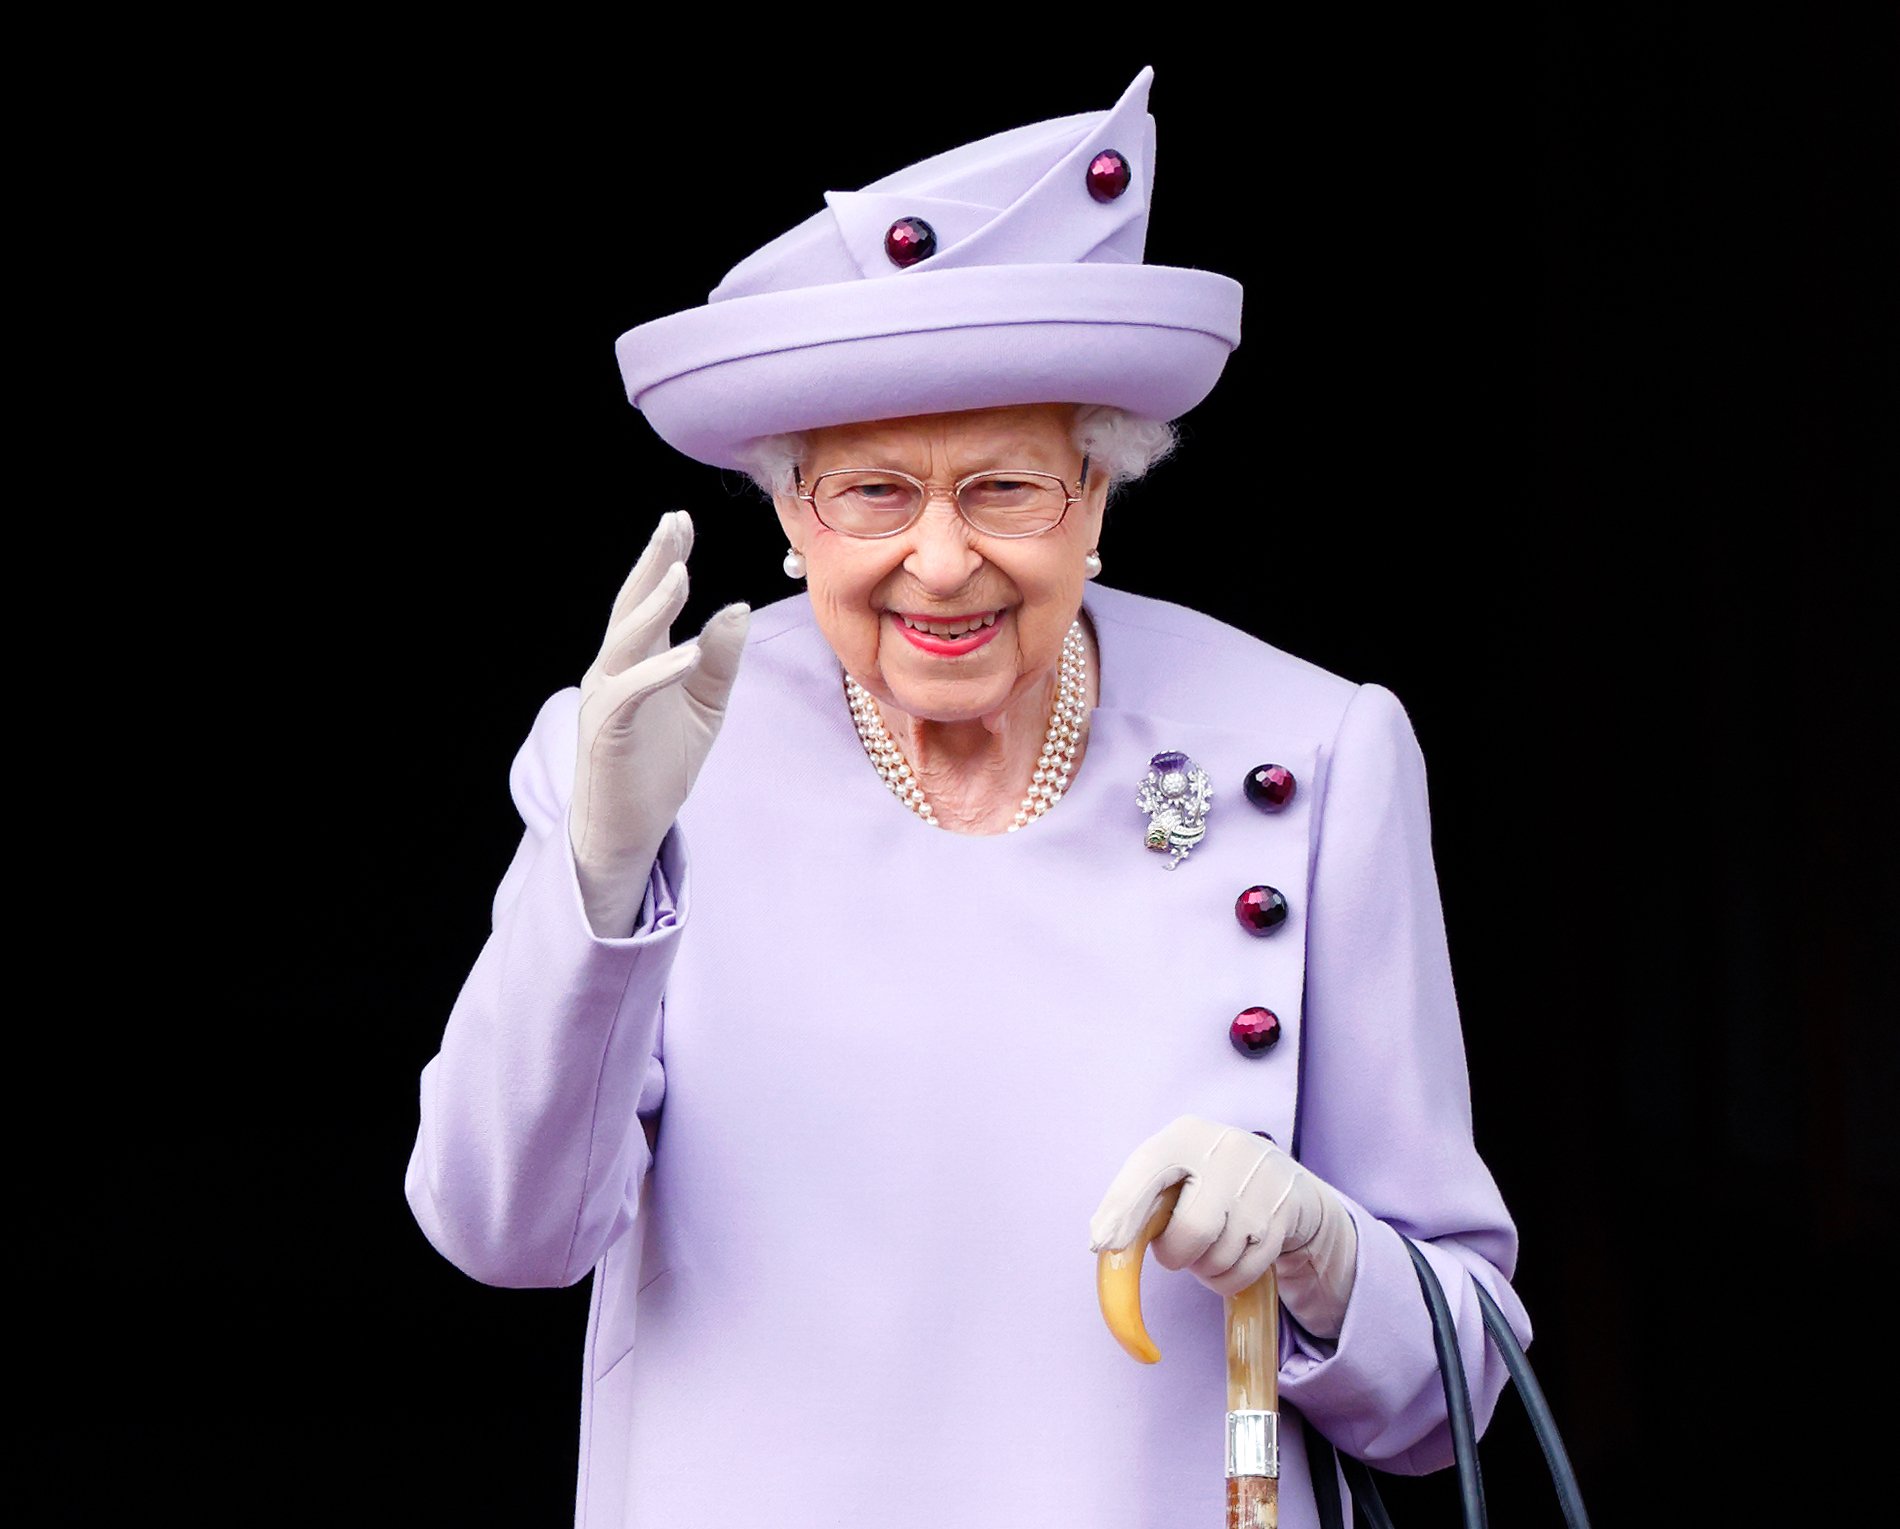 Queen Elizabeth II attends an Armed Forces Act of Loyalty Parade in the gardens of the Palace of Holyroodhouse on June 28, 2022 in Edinburgh, Scotland | Source: Getty Images